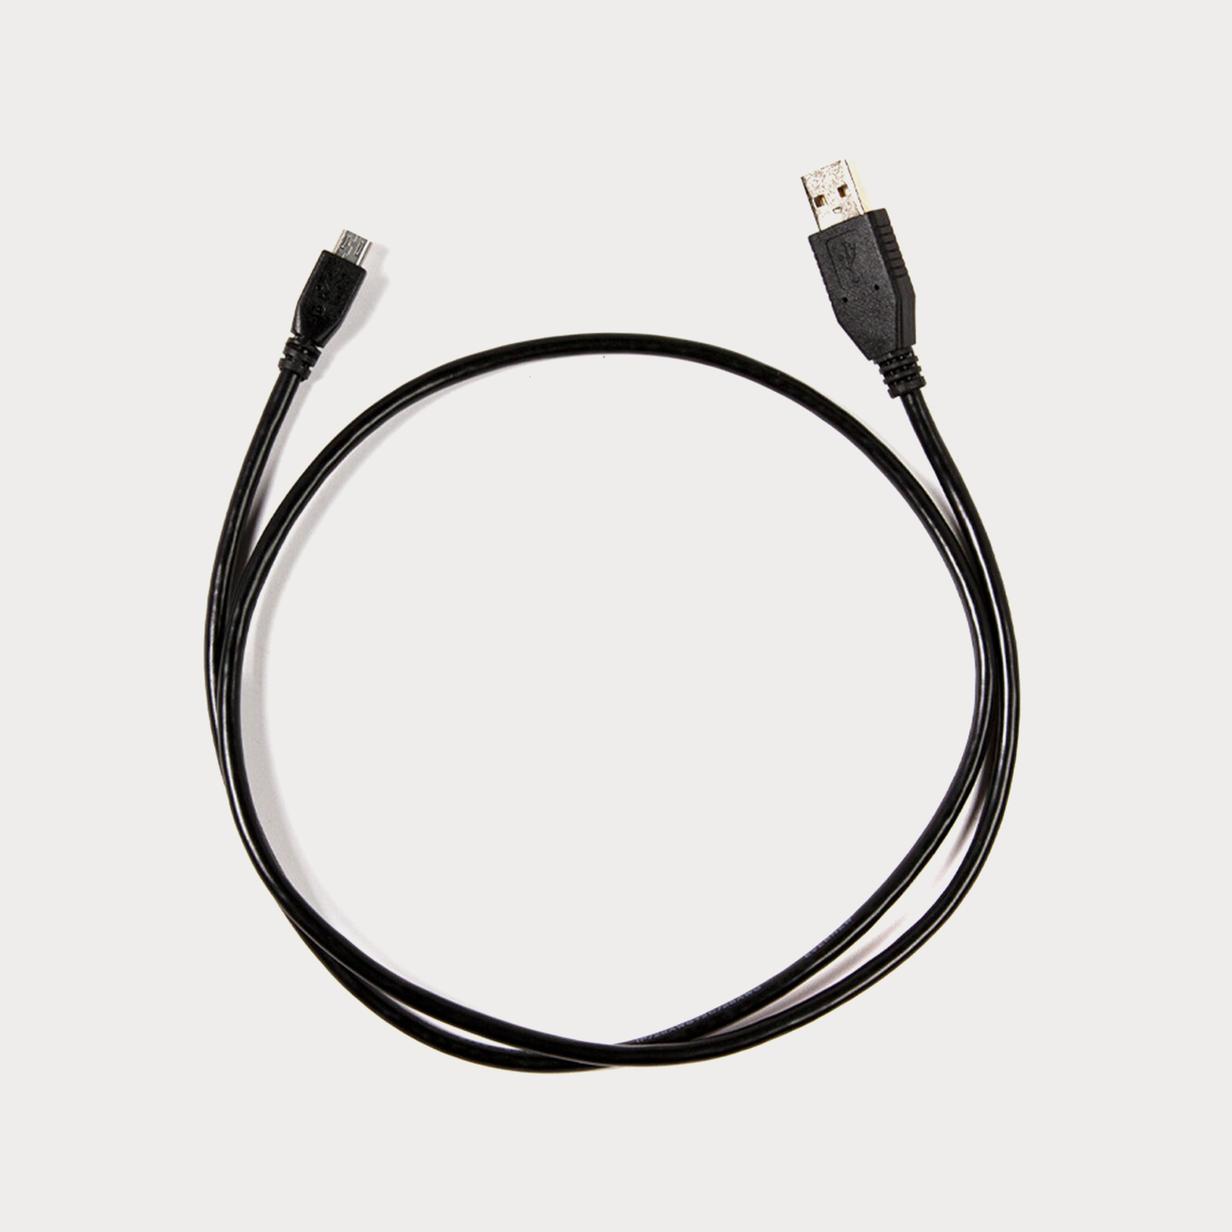 Moment Litra LMUSB Micro USB 3ft 9m Charging Cable black 1